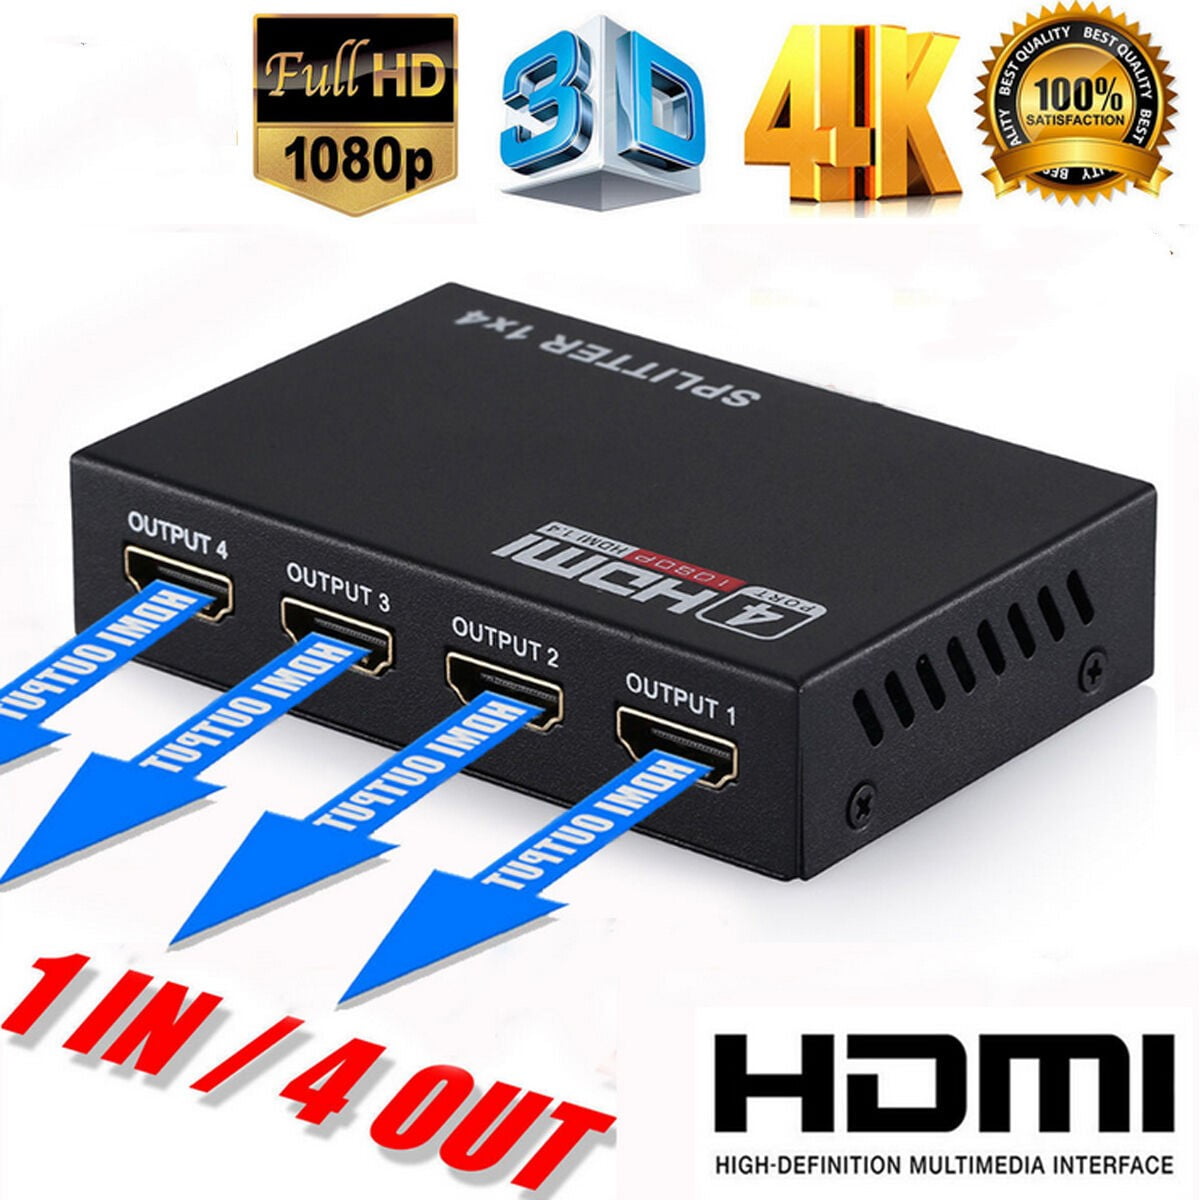 dozijn Vlekkeloos Uitstekend HDMI Splitter 1 in 3 4 Out,V1.4 Powered 1x4 Ports Box Supports 4K@30Hz Full  Ultra HD 1080P and 3D Compatible with PC STB Xbox PS4 PS3 Fire Stick Roku  Blu-Ray Player HDTV -